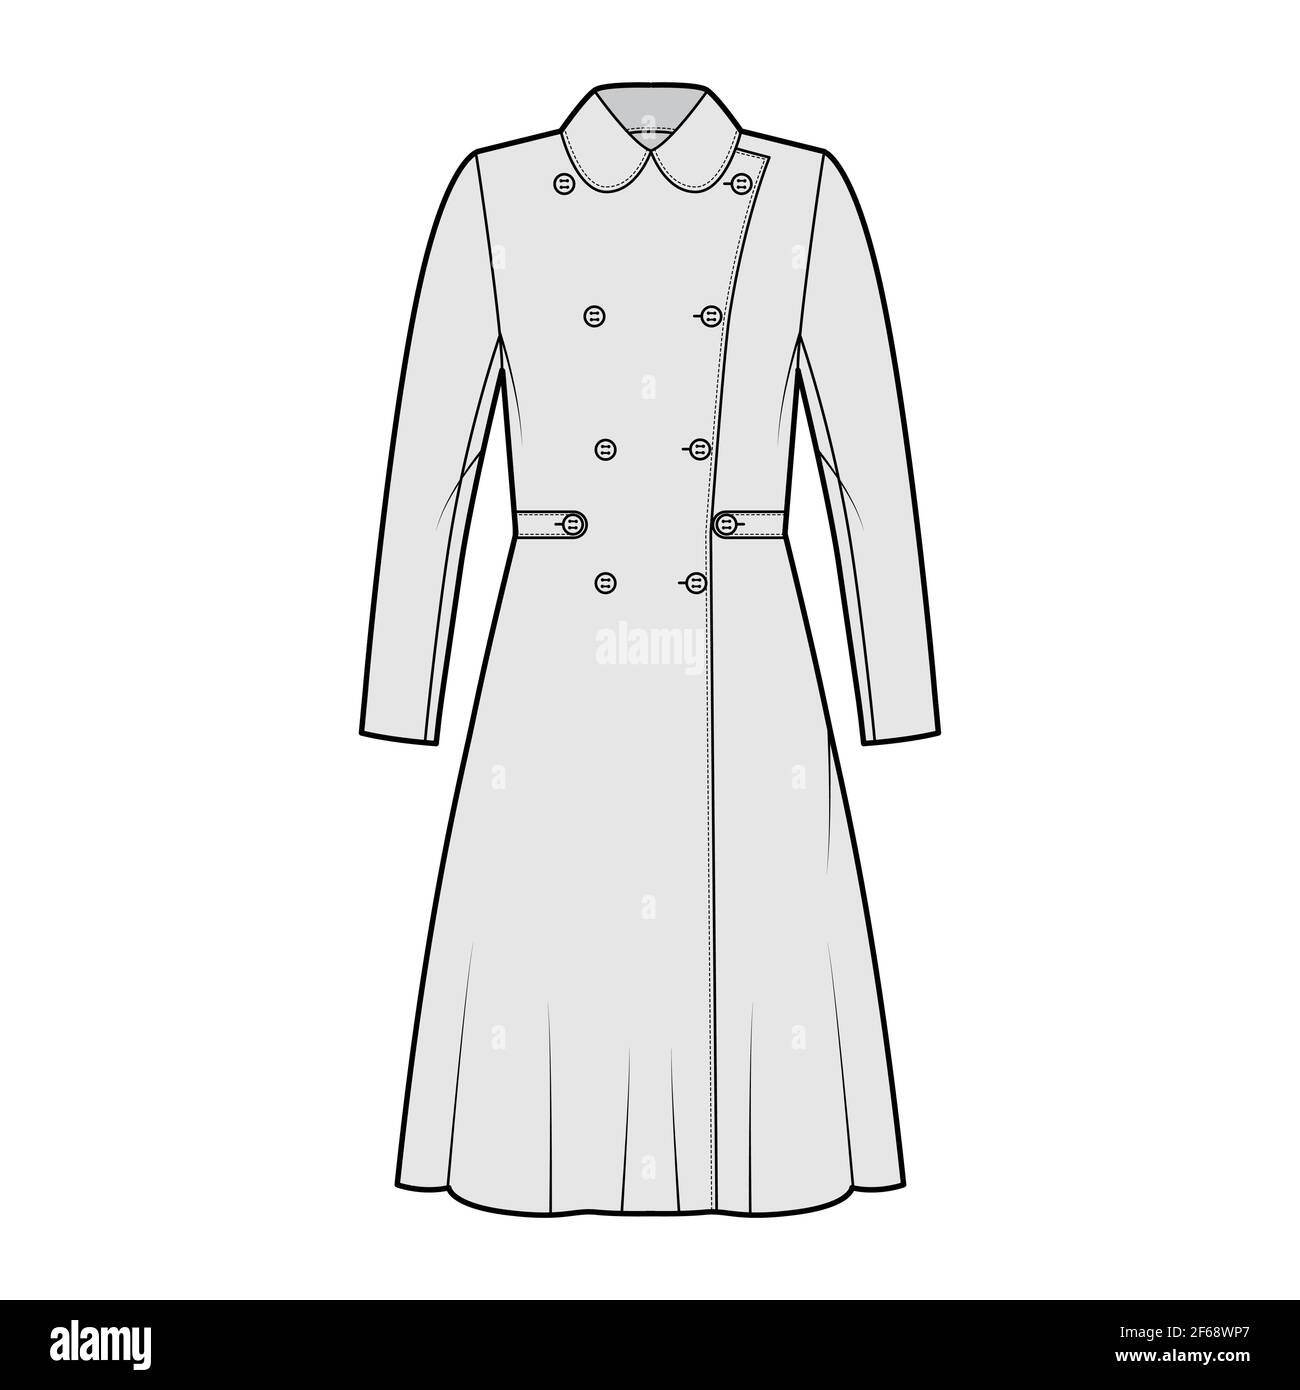 Skating coat technical fashion illustration with tabs, double breasted, long sleeves, round collar, knee length. Flat jacket template front, grey color style. Women, men, unisex top CAD mockup Stock Vector